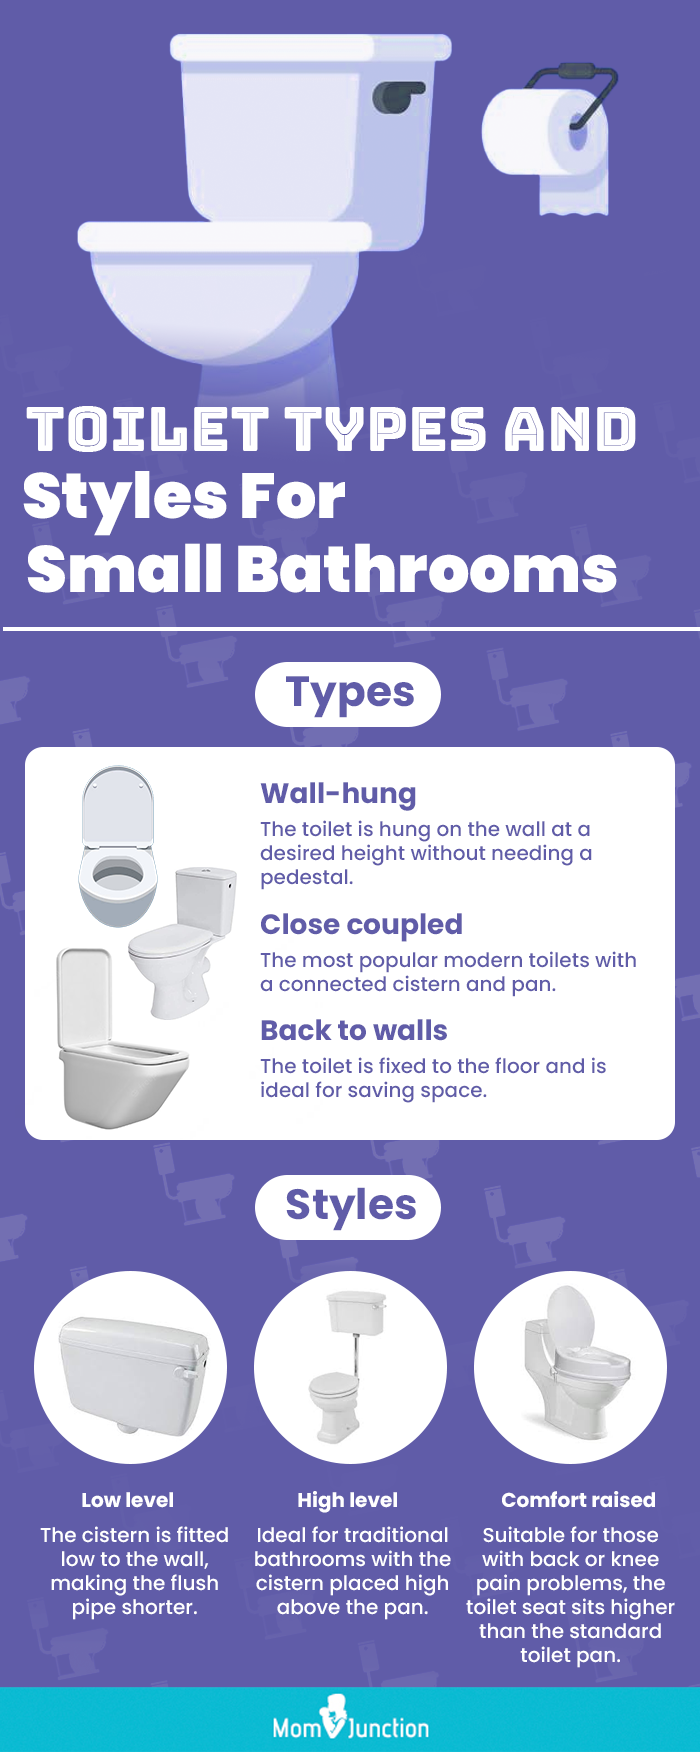 Toilet Types And Styles For Small Bathrooms (infographic)